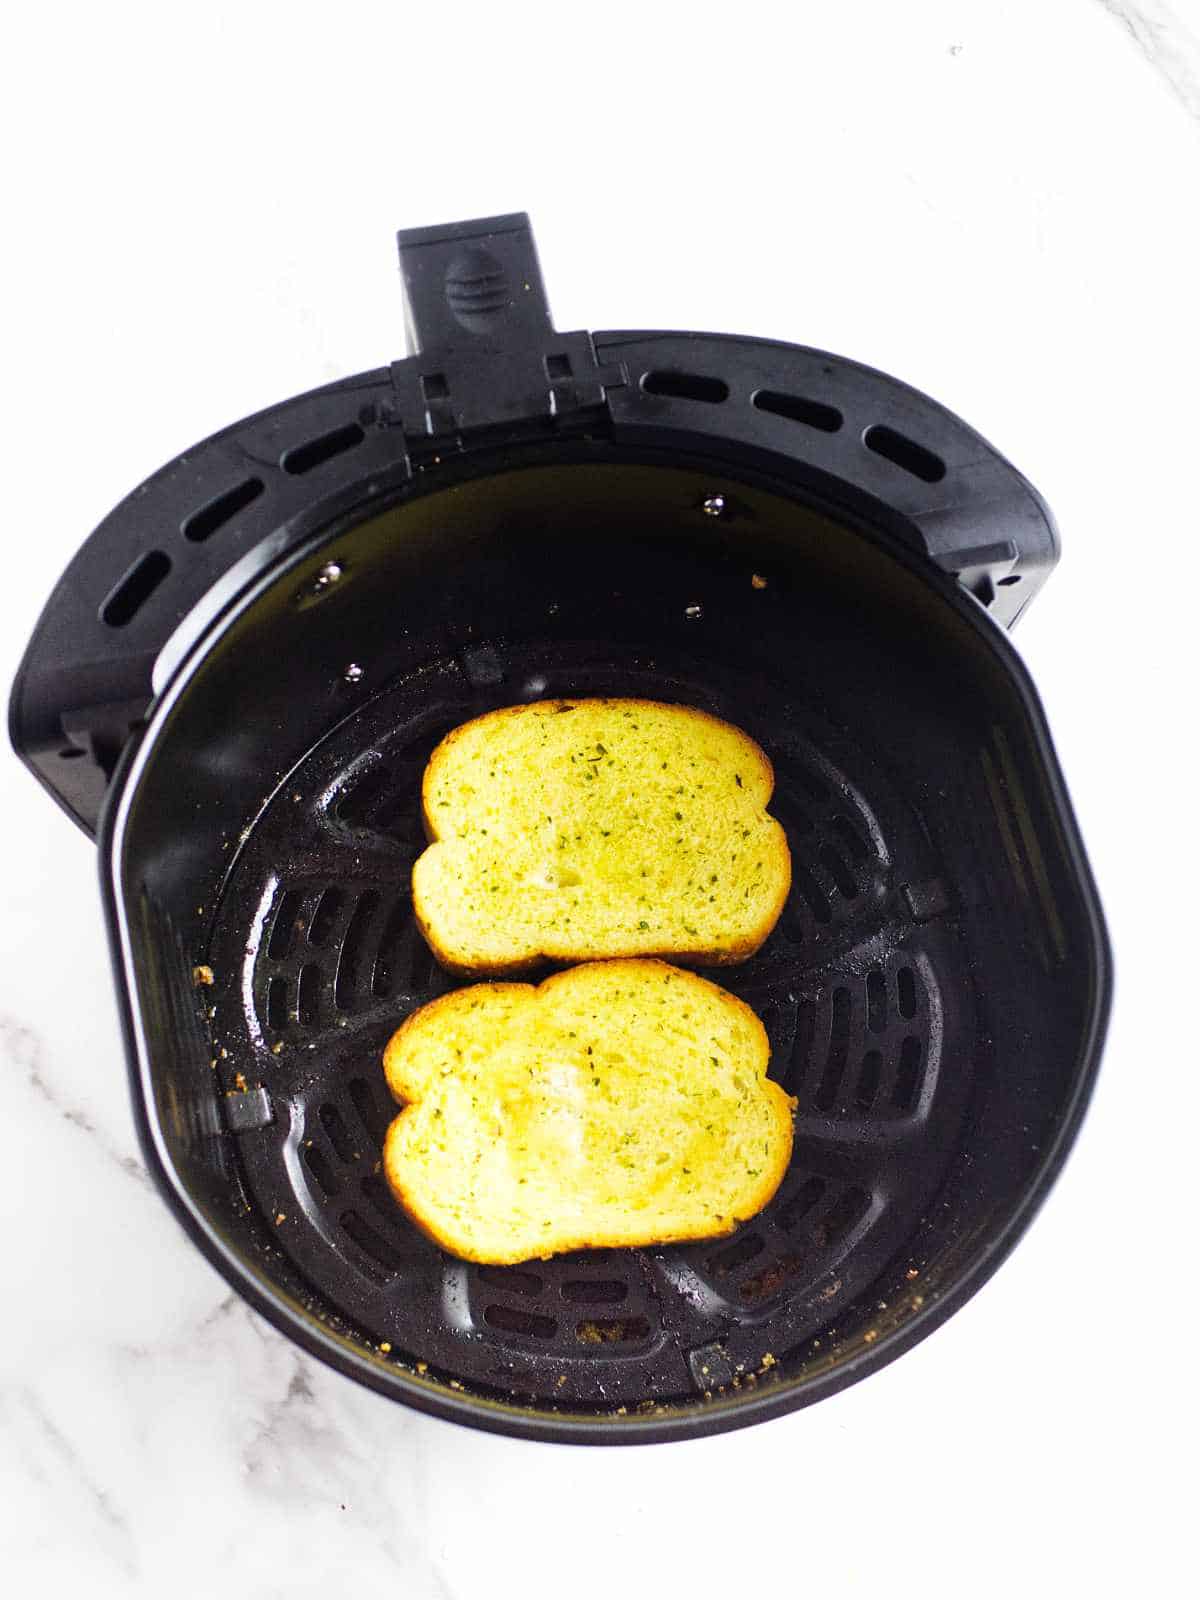 toasted French bread with garlic butter and herb in an airfryer basket.